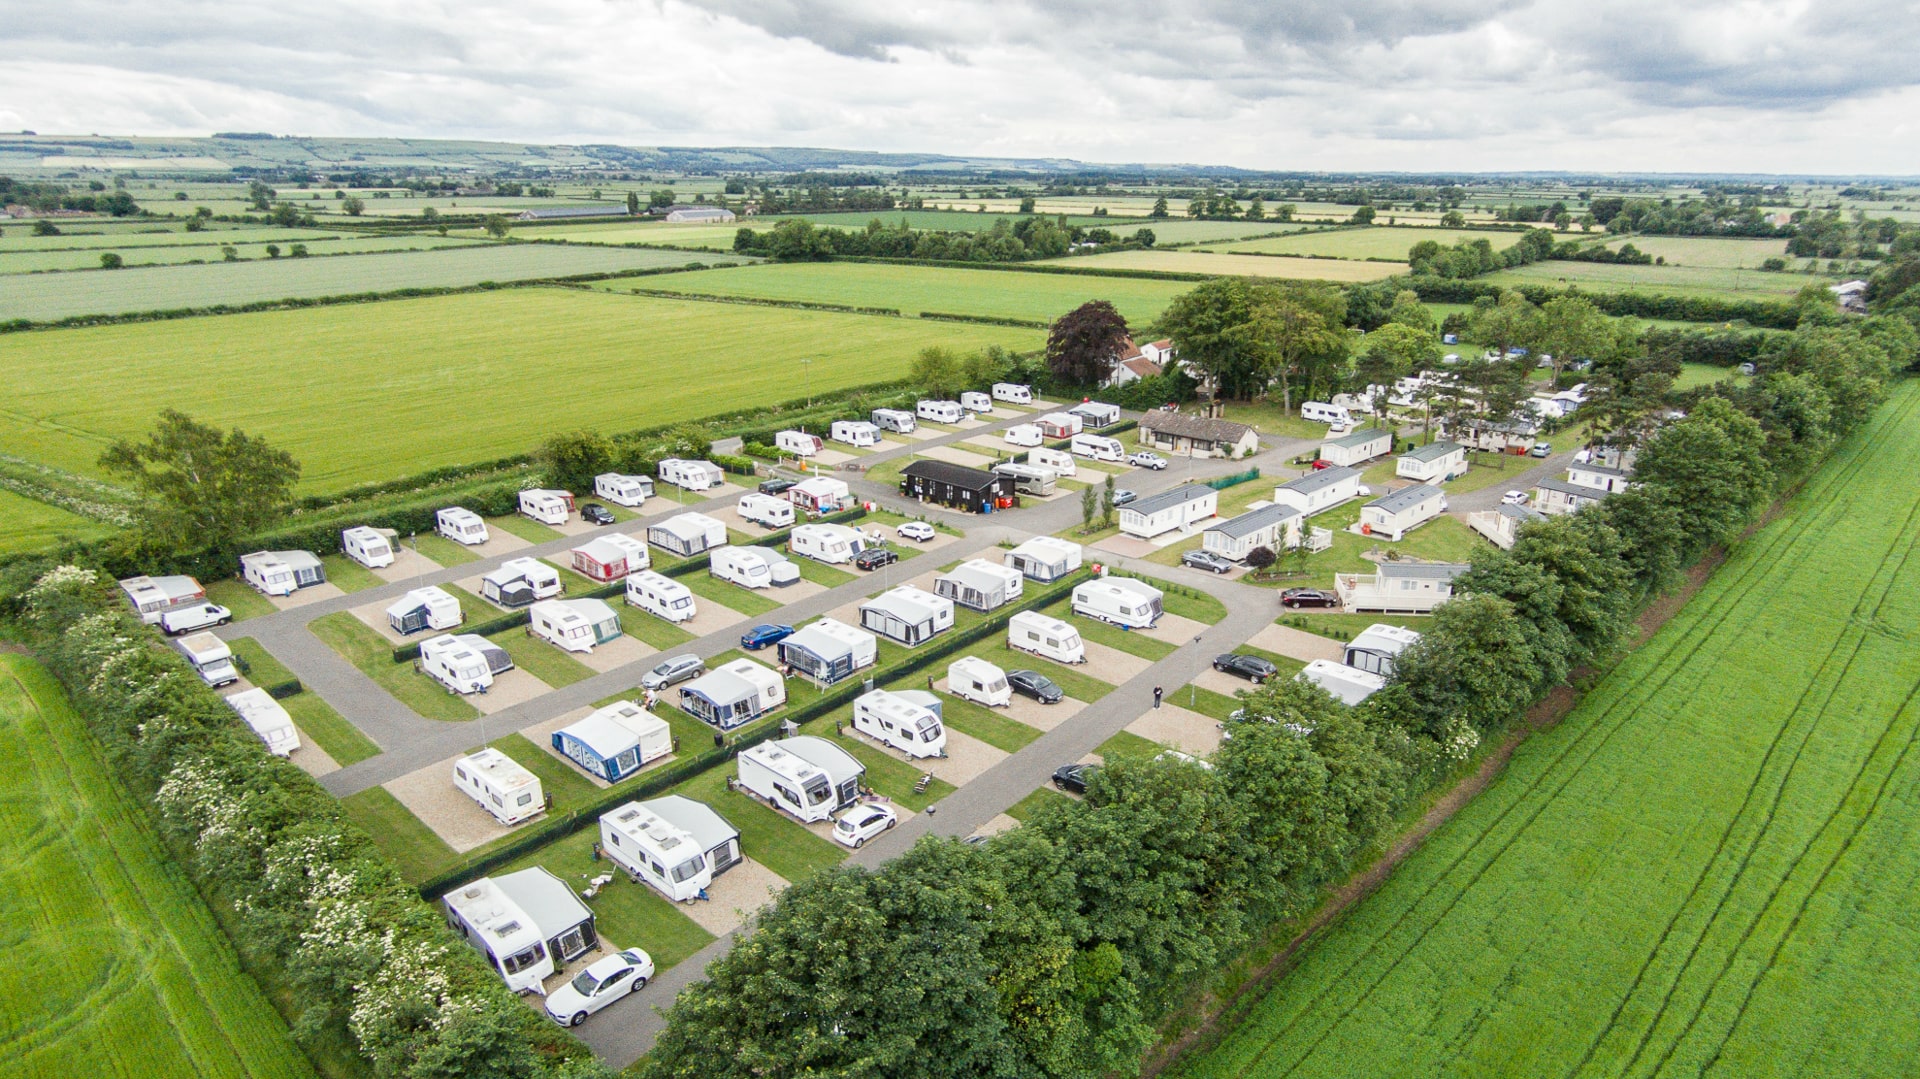 Find your perfect holiday from our collection of caravan parks in